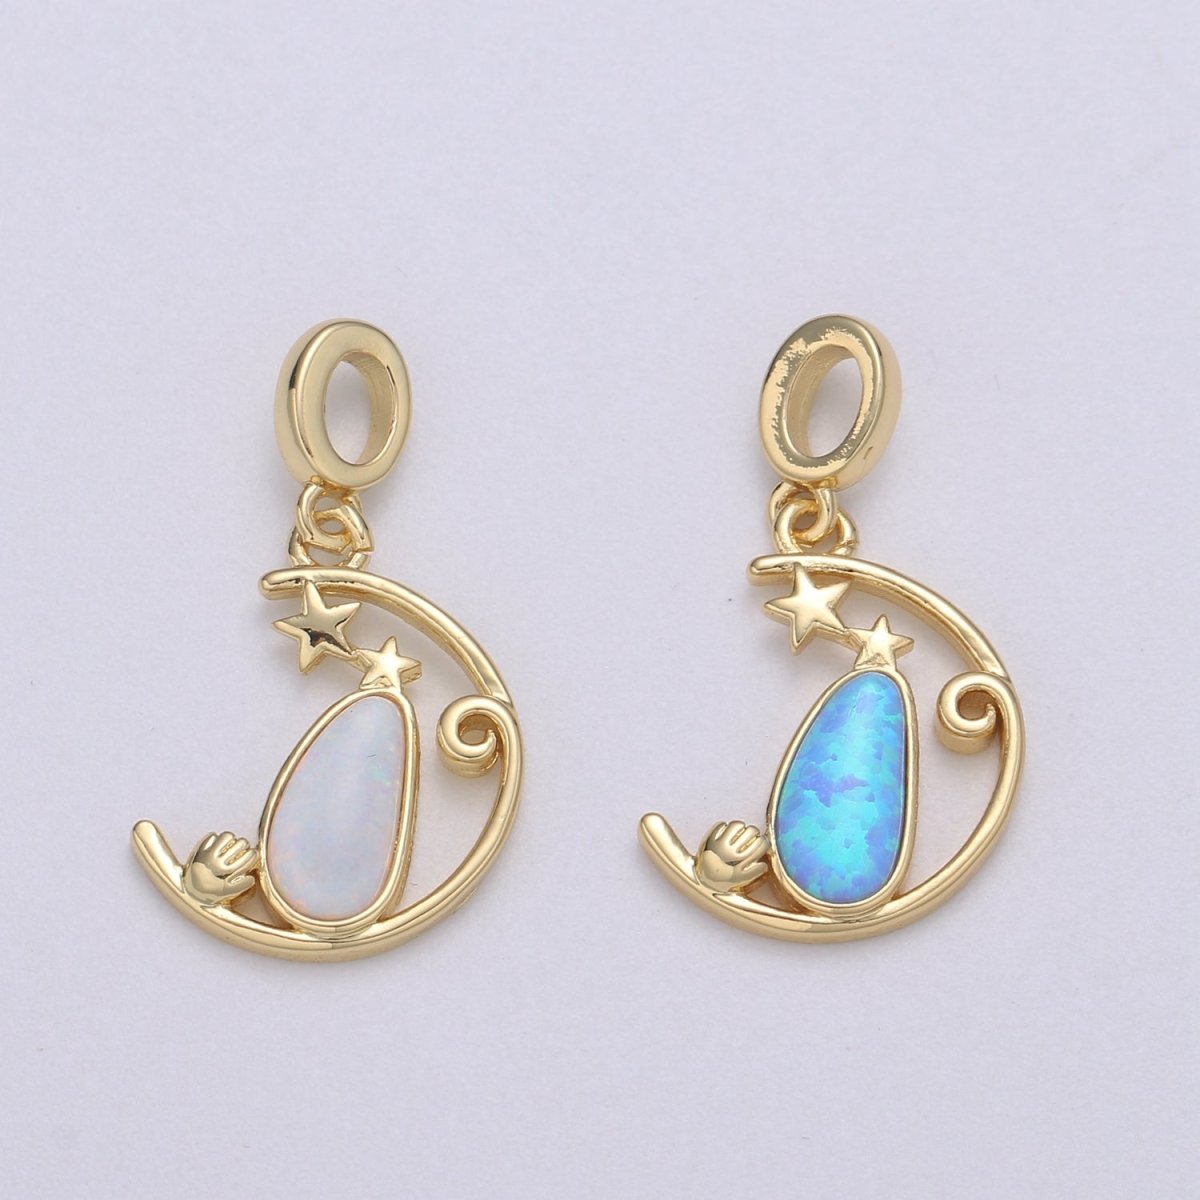 Blue and White Opal 24K Star Pendant, Teardrop Opal Charm Baby Hand Charm for Bracelet Earring Necklace H-608 H-612 - DLUXCA